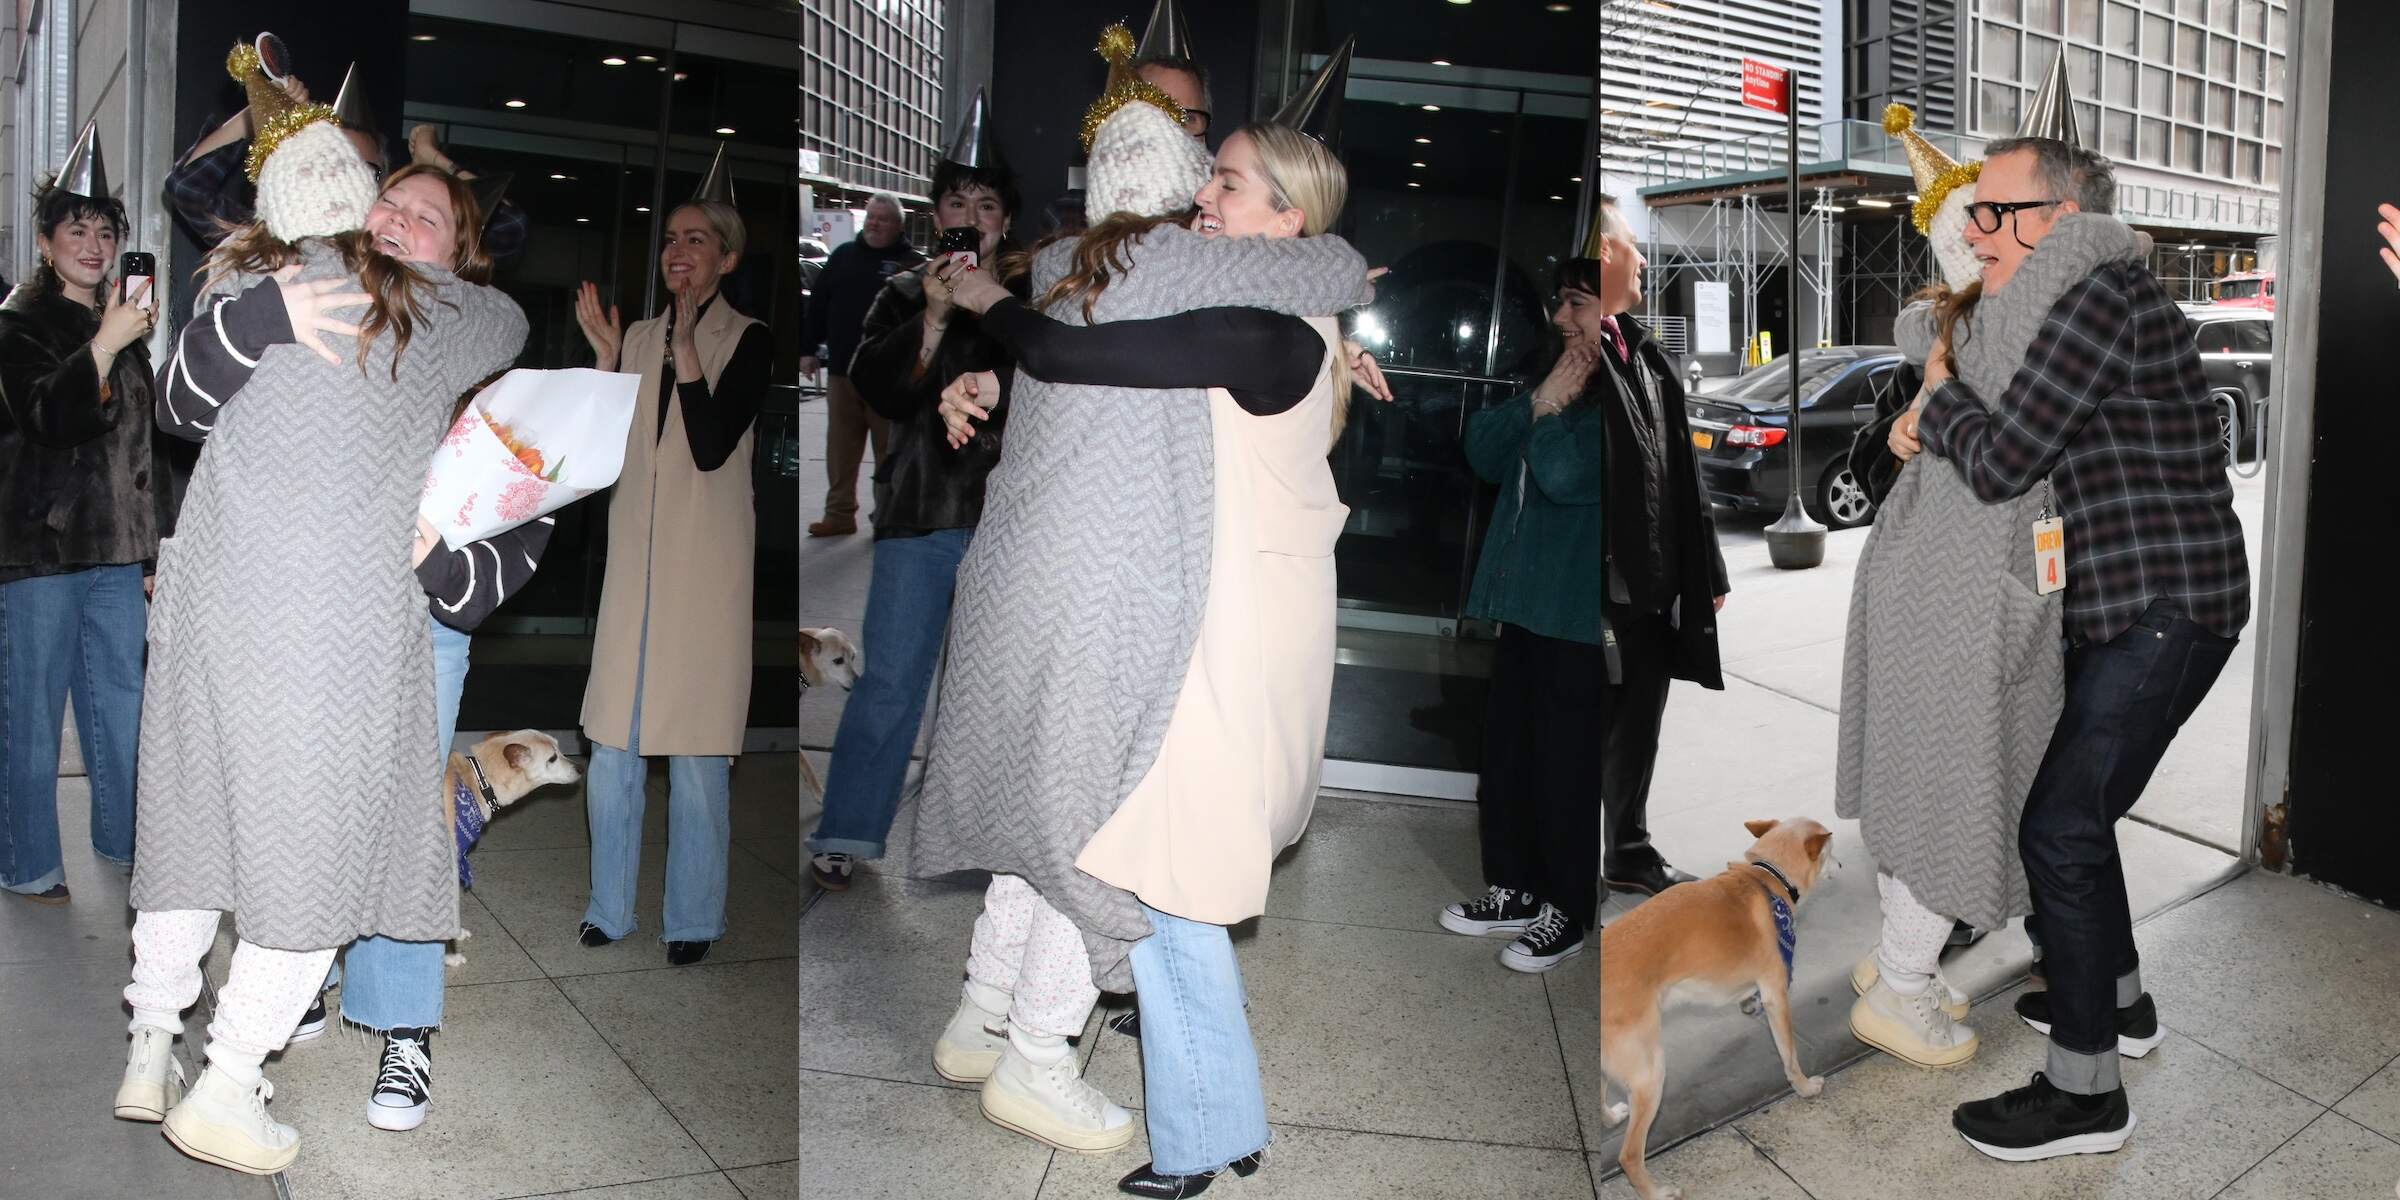 TV host Drew Barrymore runs to greet and hug a friend at the airport as she wears PJ bottoms and tennis shoes